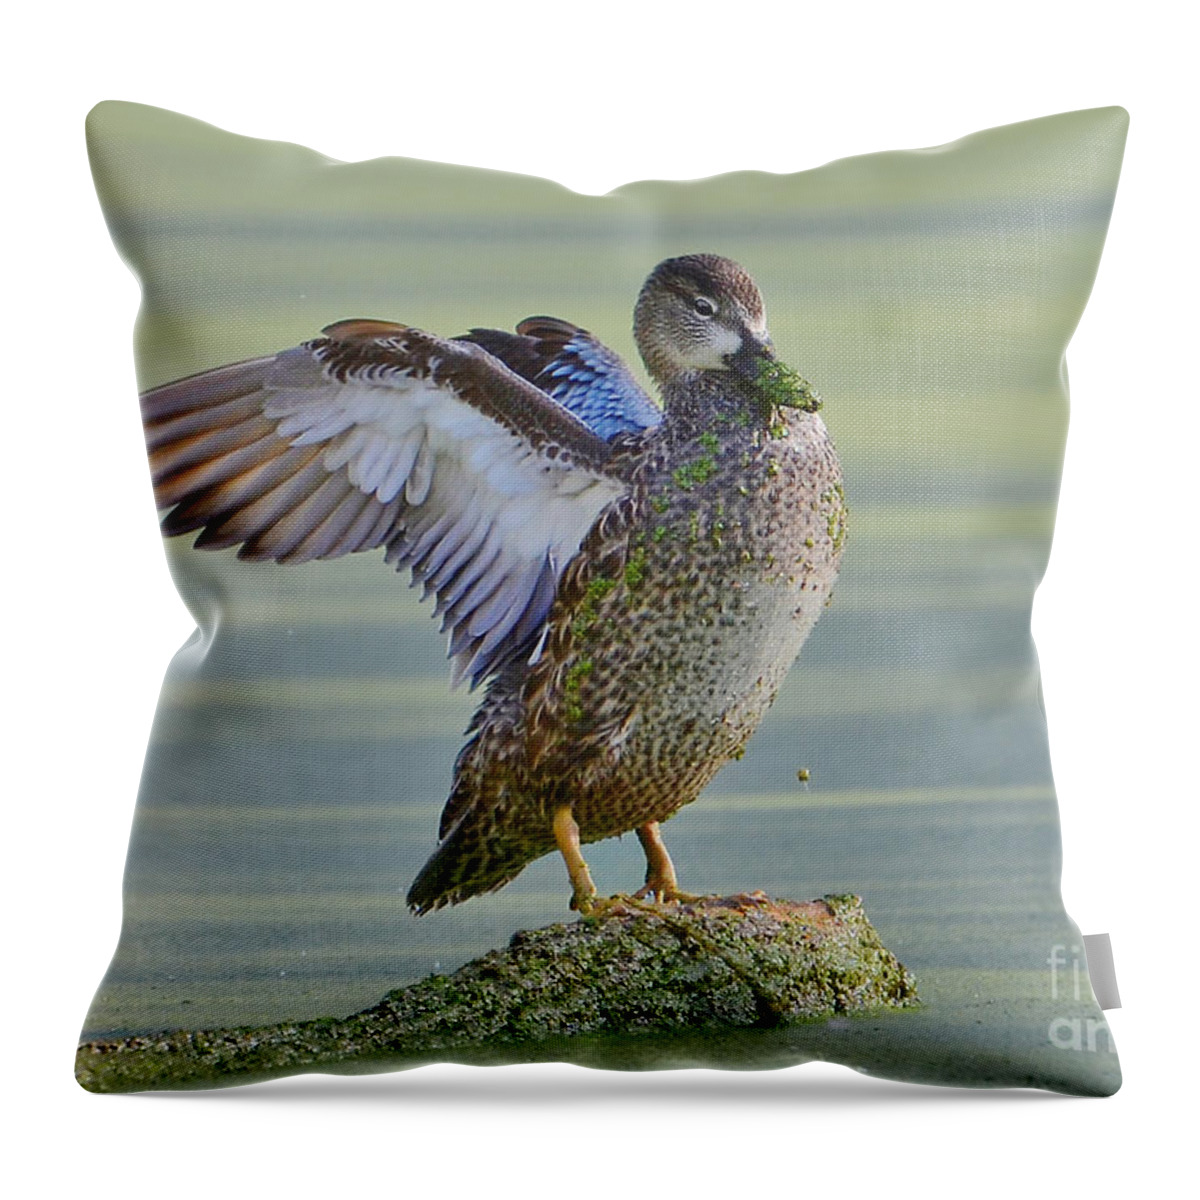 Ducks Throw Pillow featuring the photograph Spreading Her Wings by Kathy Baccari